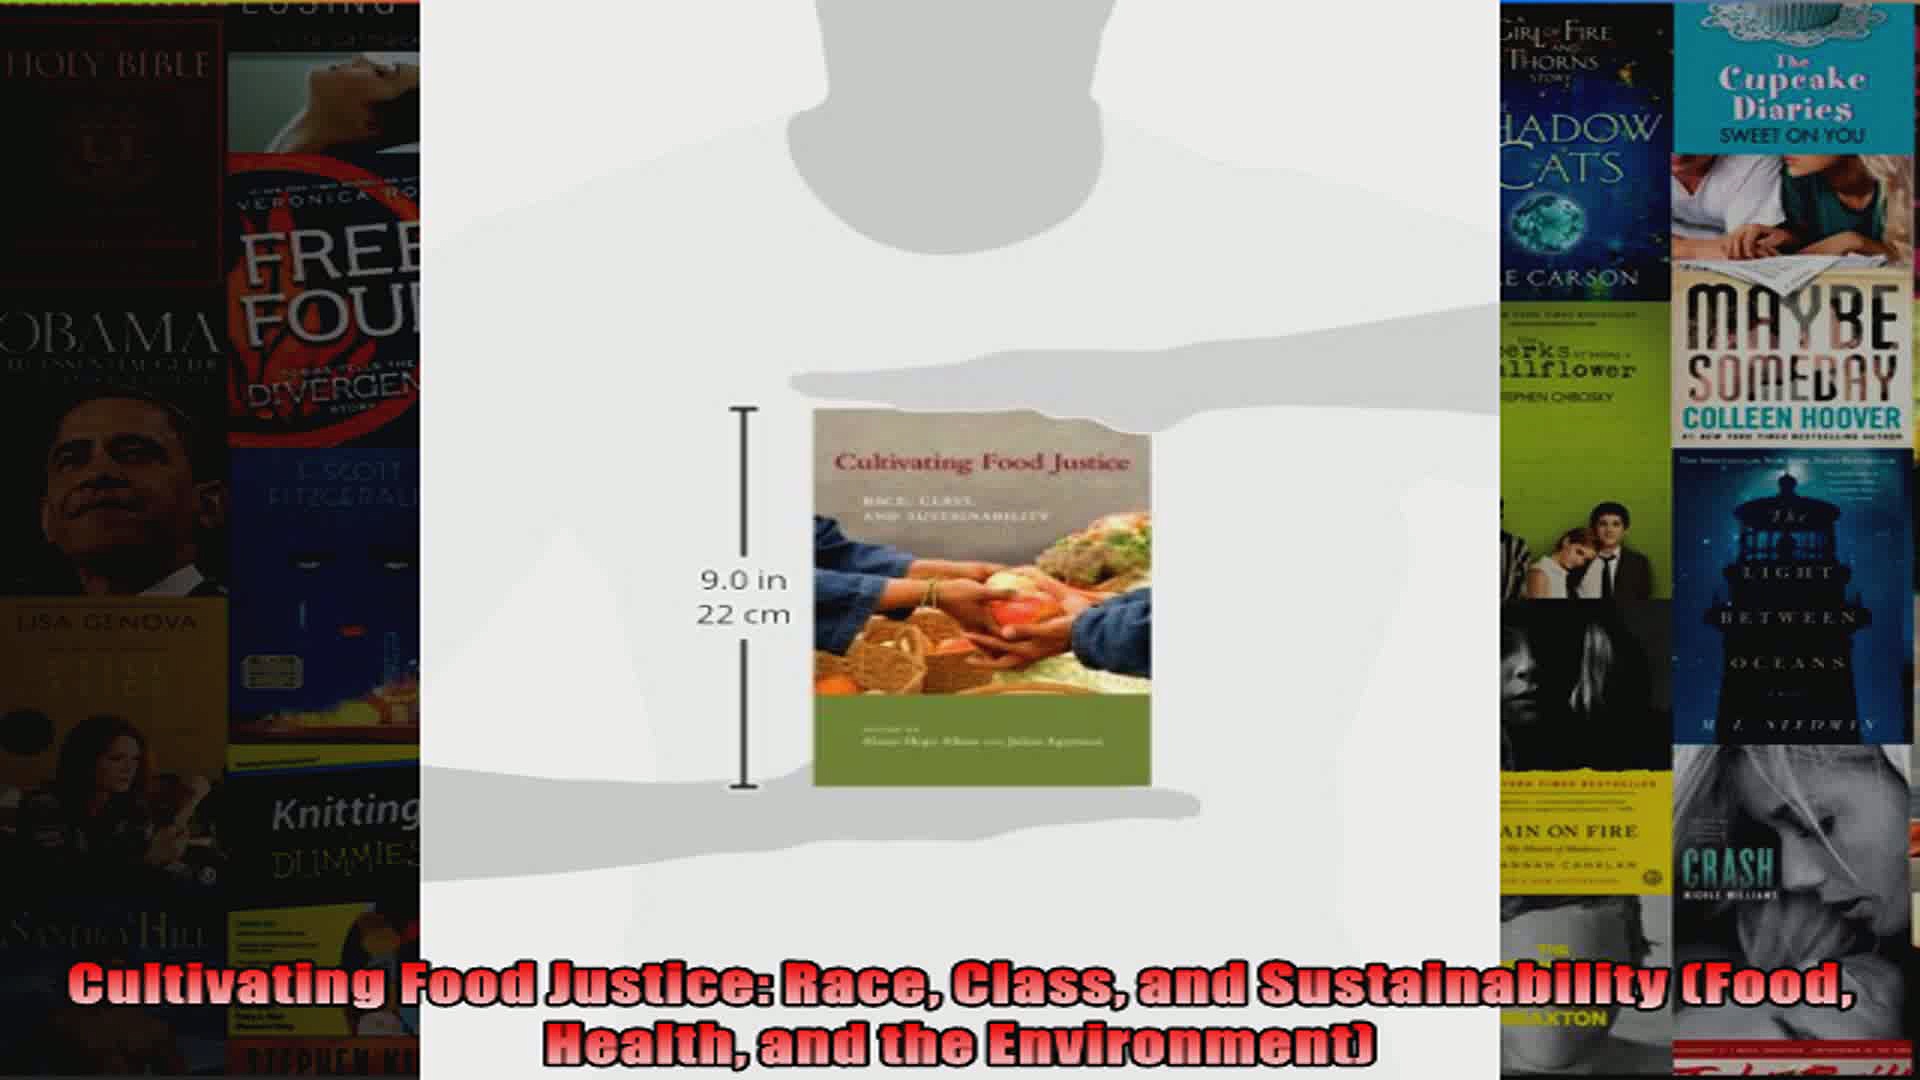 Cultivating Food Justice Race Class and Sustainability Food Health and the Environment